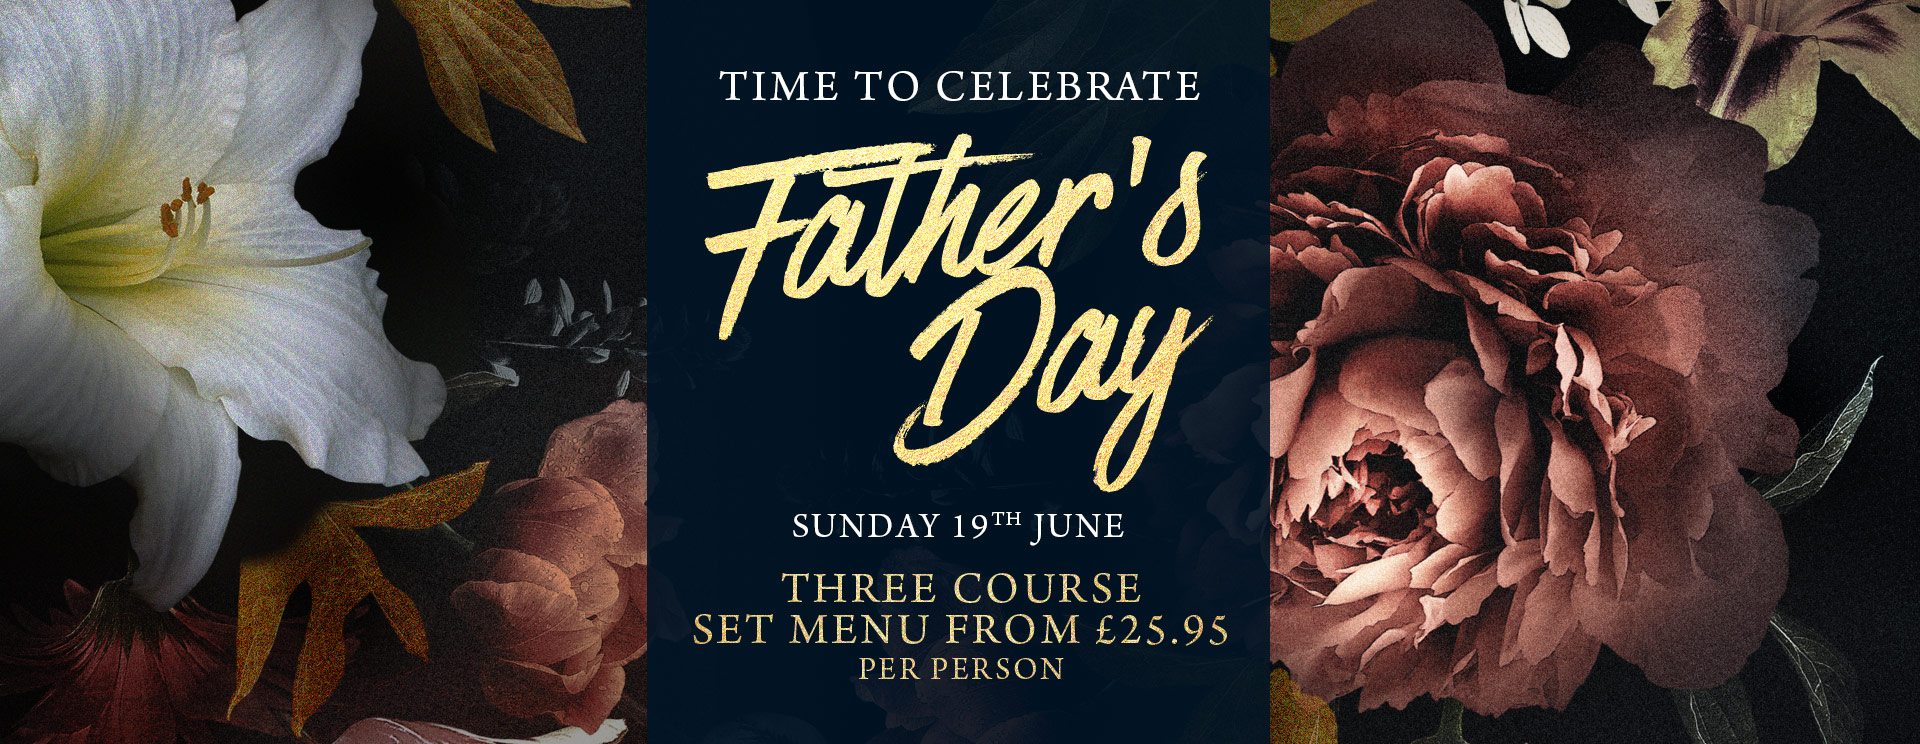 Fathers Day at The Black Horse